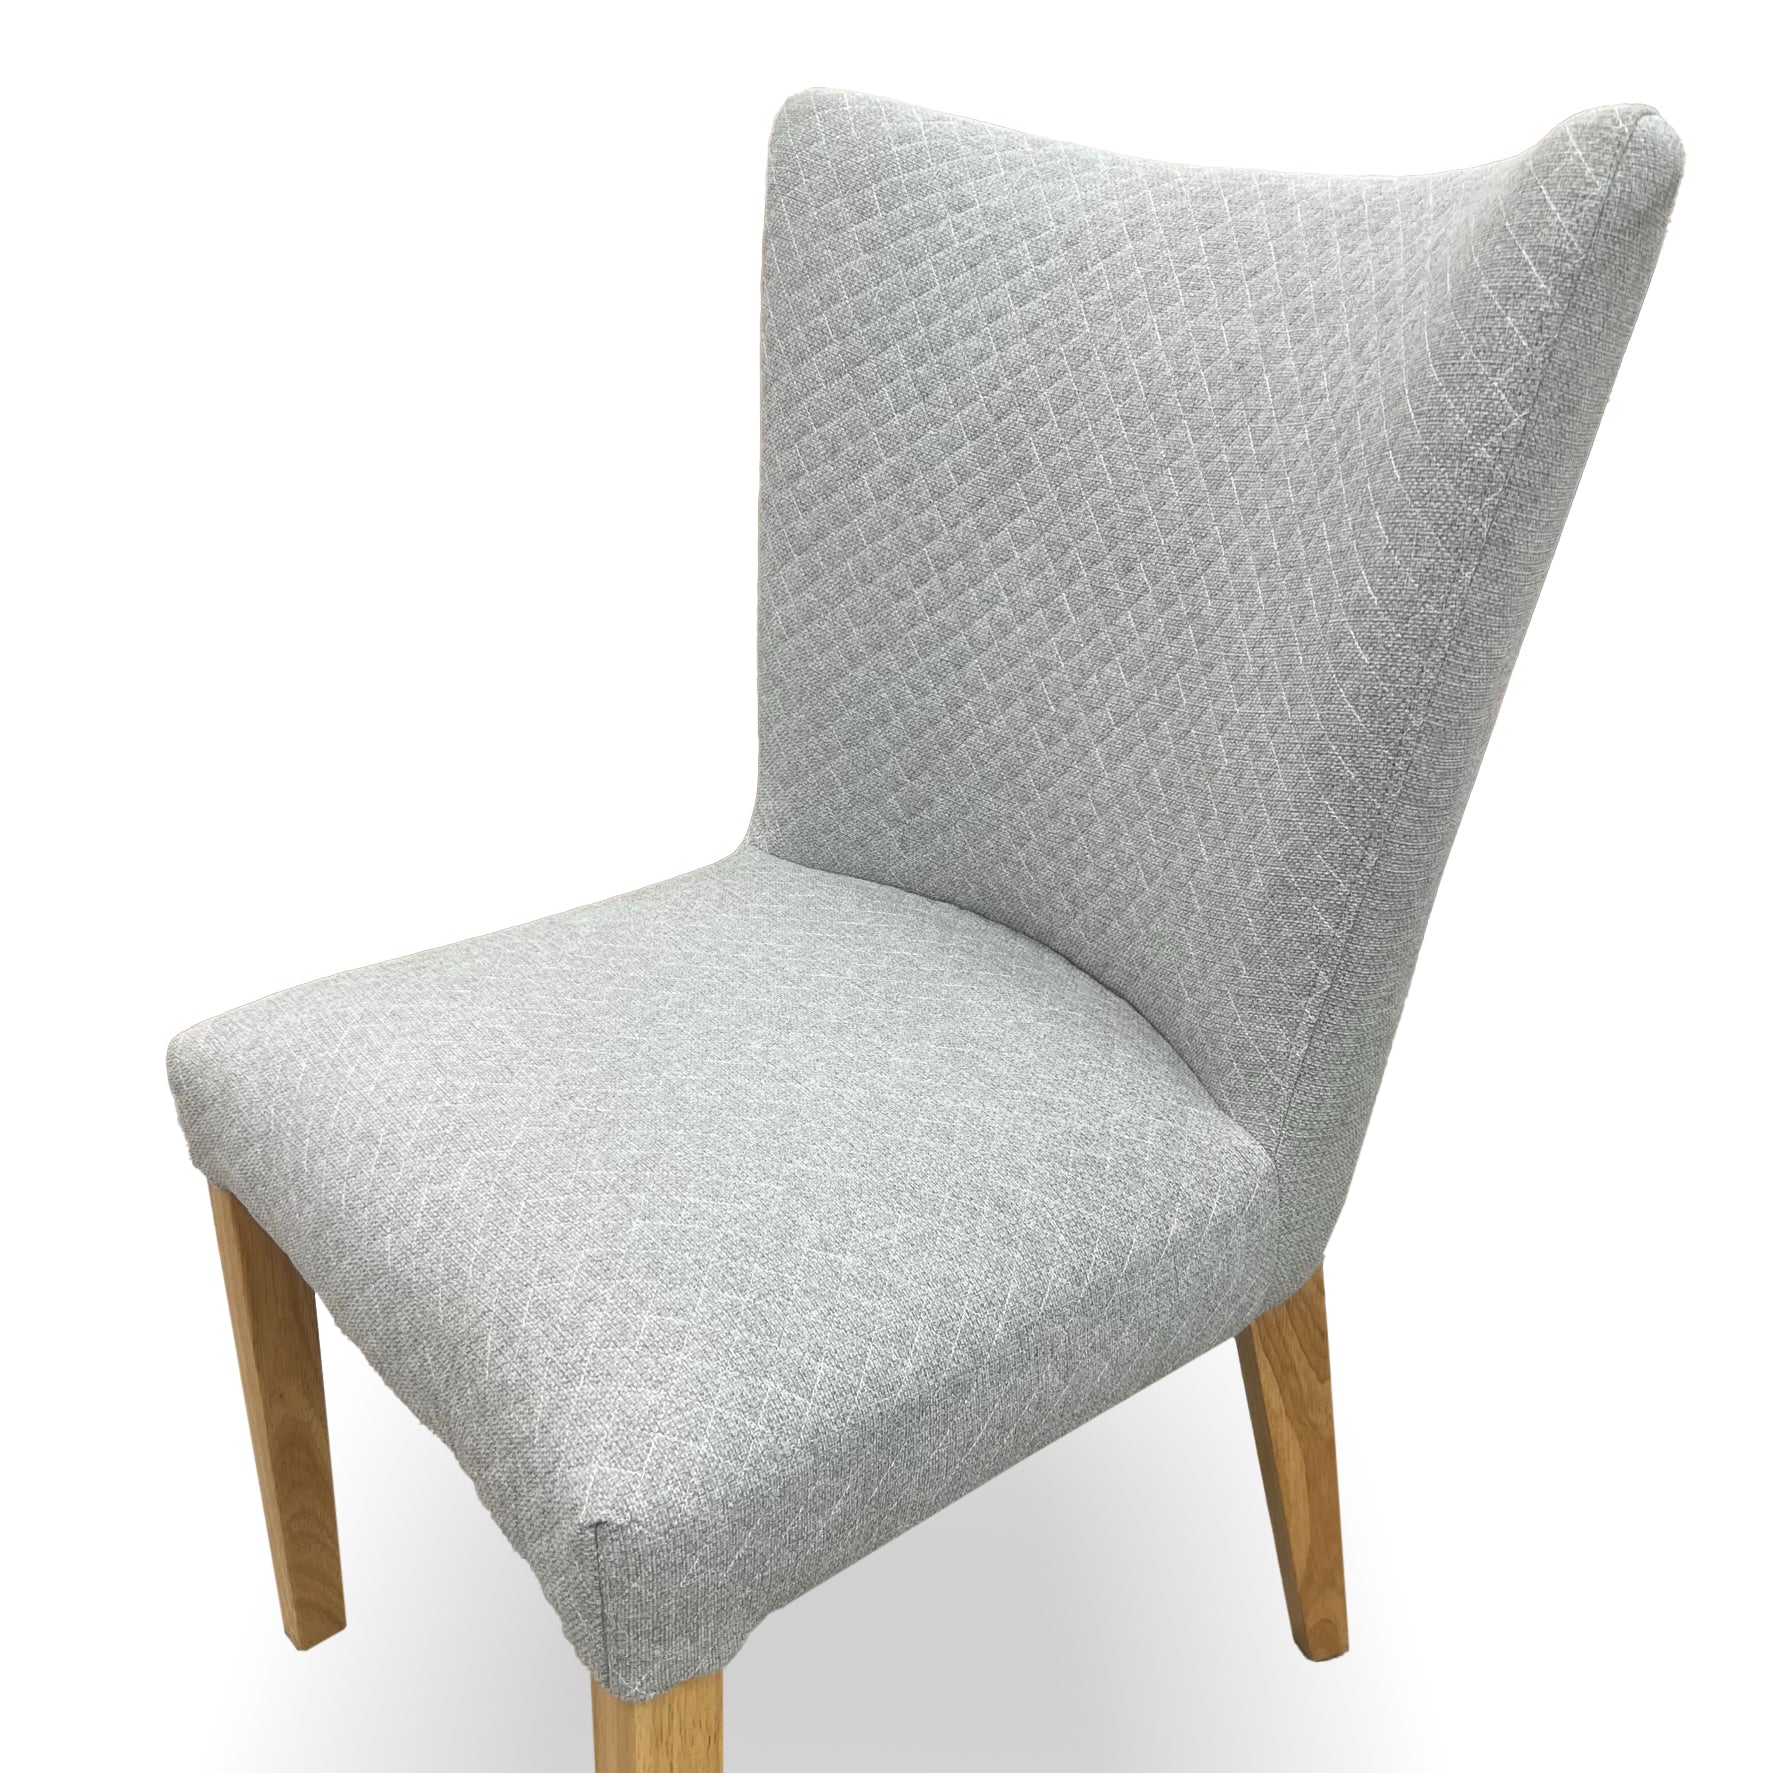 Tobago Upholstered Chair in Light Grey With Natural Leg